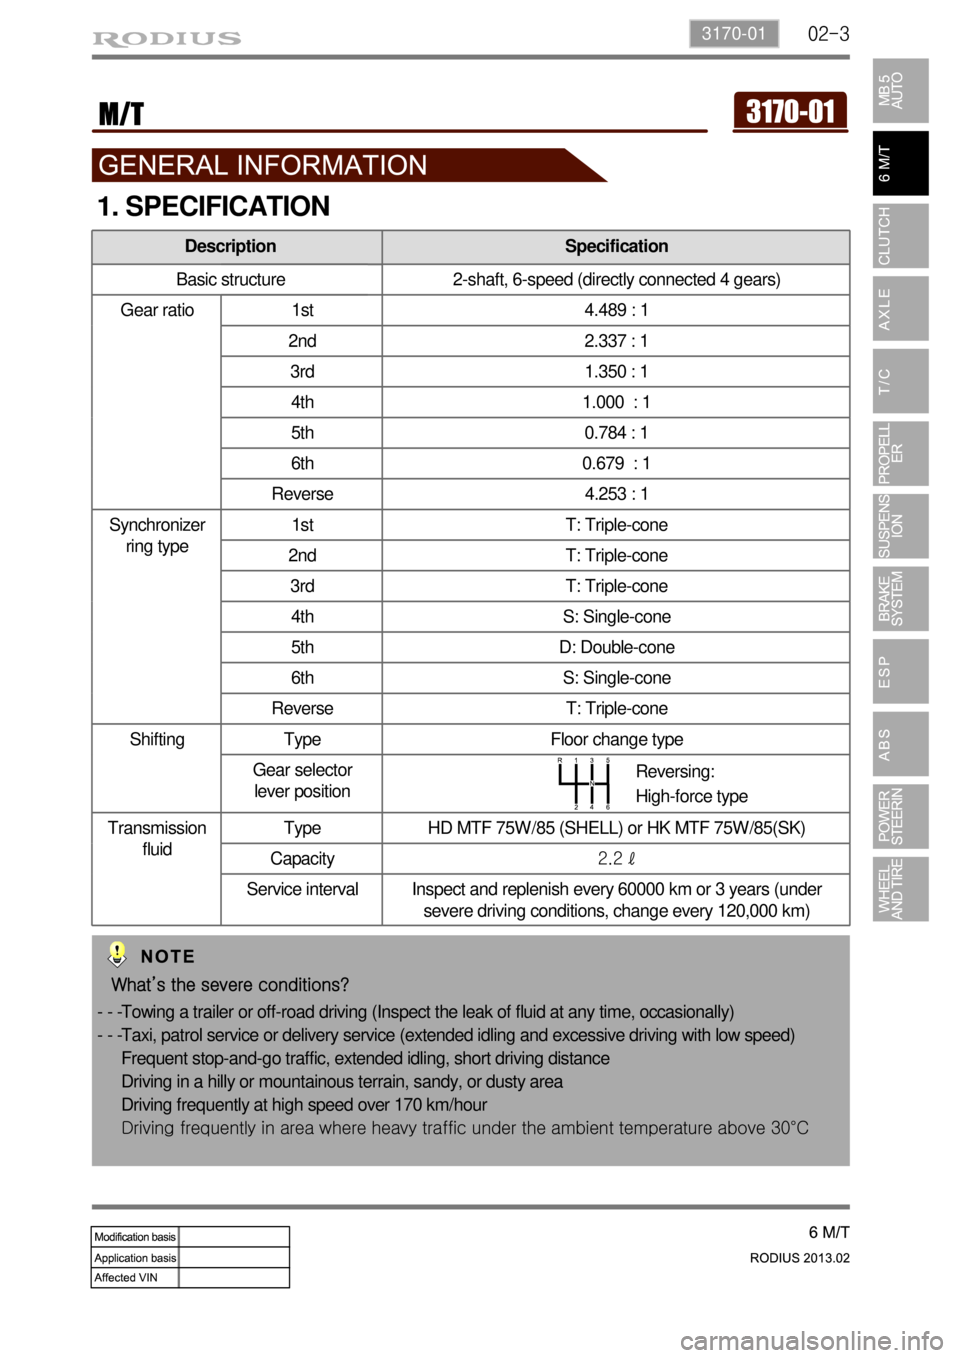 SSANGYONG TURISMO 2013  Service Manual 02-33170-01
Description Specification
Basic structure 2-shaft, 6-speed (directly connected 4 gears)
Gear ratio 1st 4.489 : 1
2nd 2.337 : 1
3rd 1.350 : 1
4th 1.000  : 1
5th 0.784 : 1
6th 0.679  : 1
Rev